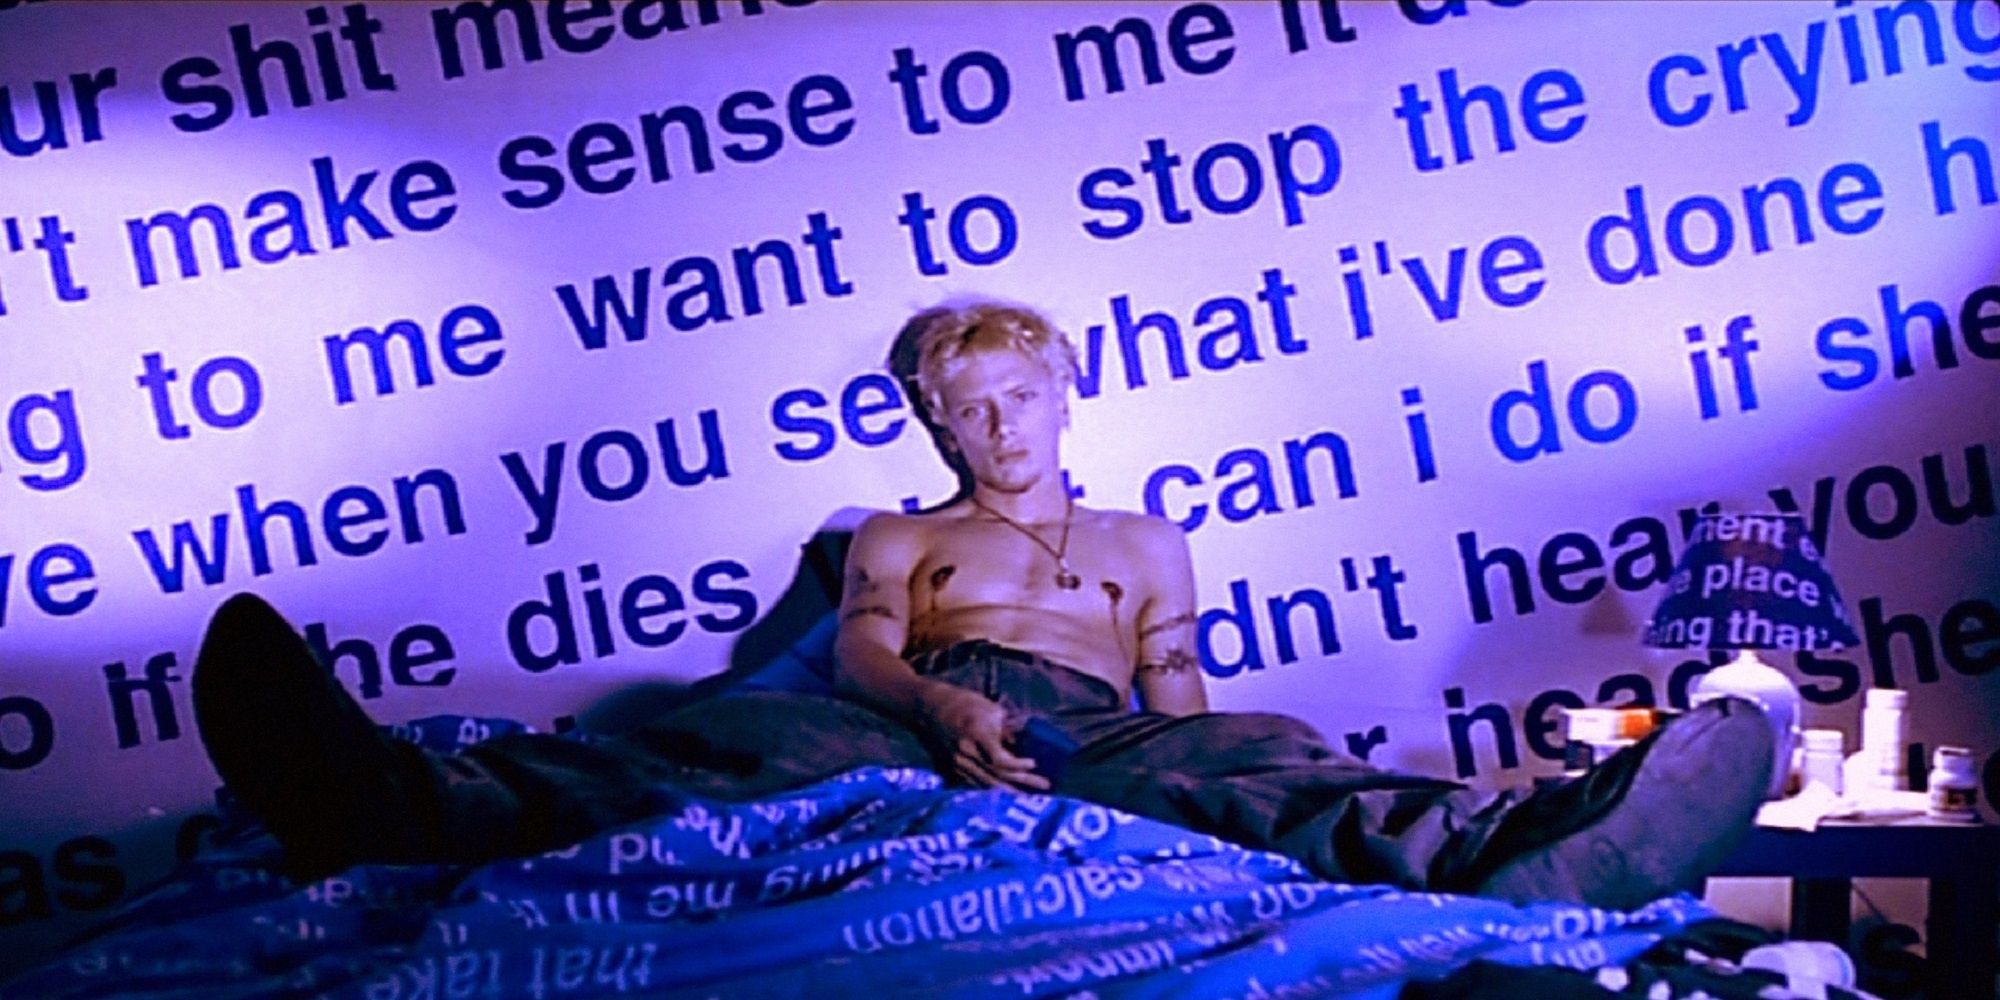 Montgomery sits on a bed with words projecting onto the wall in Nowhere.